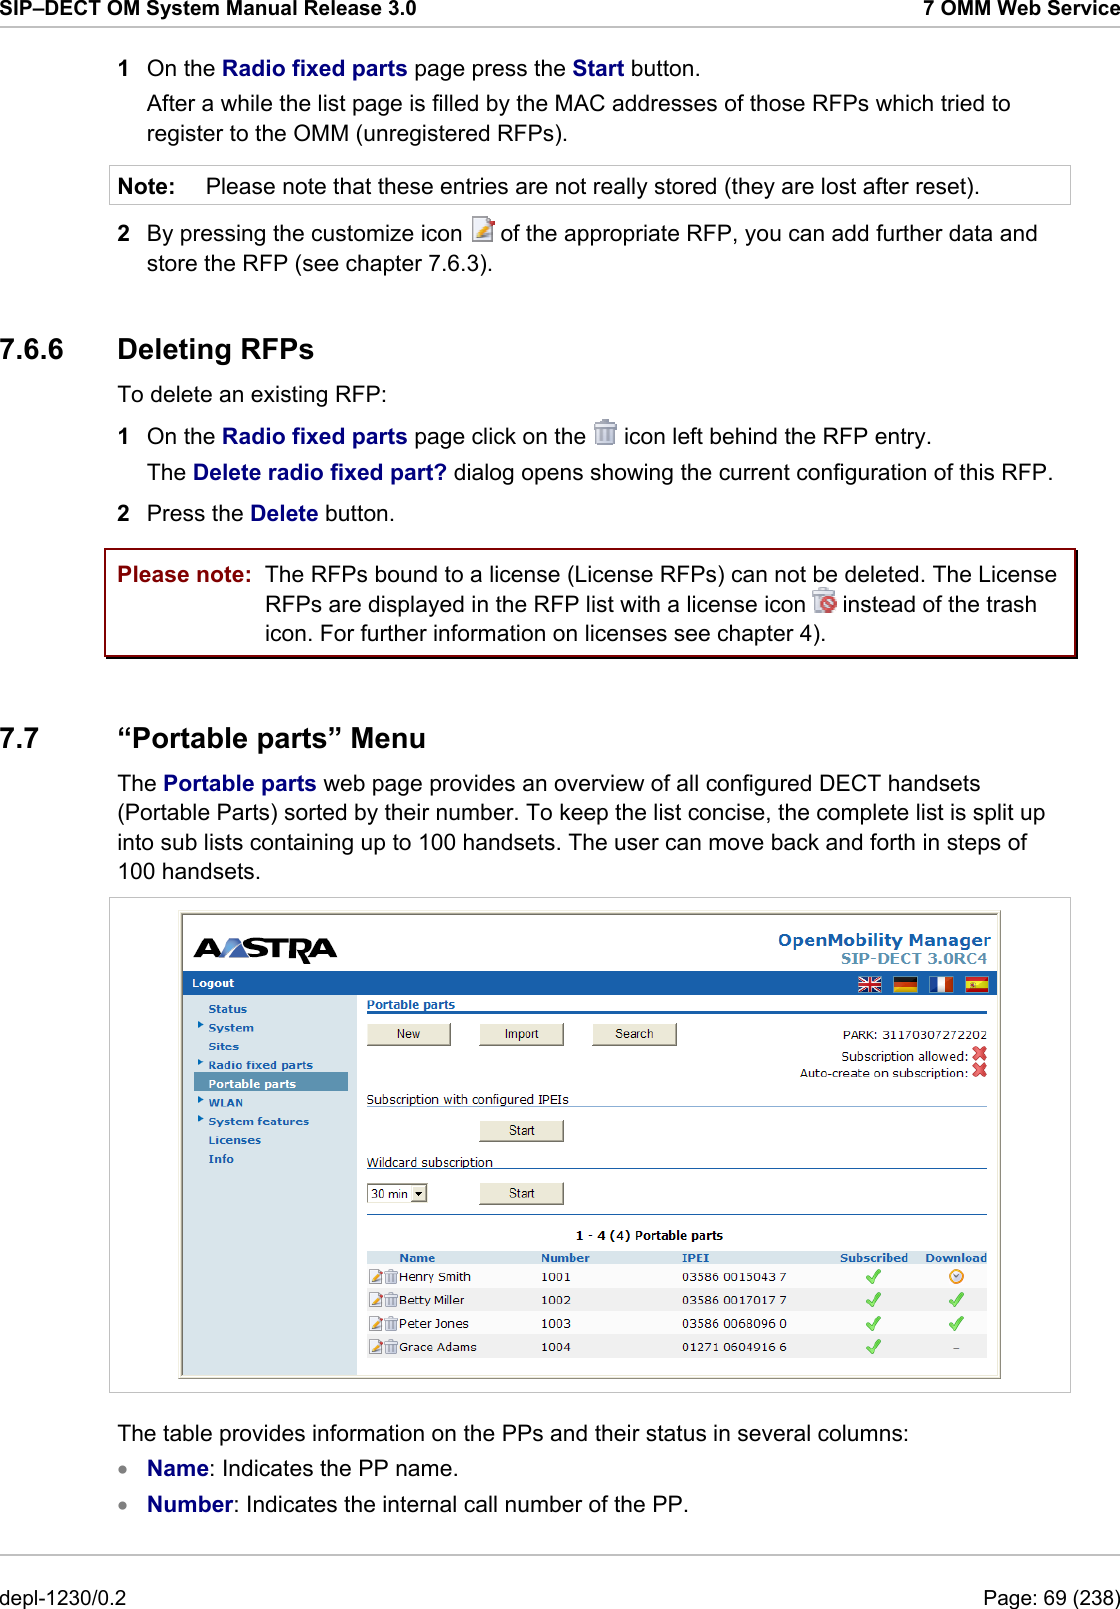 SIP–DECT OM System Manual Release 3.0  7 OMM Web Service 1  On the Radio fixed parts page press the Start button. After a while the list page is filled by the MAC addresses of those RFPs which tried to register to the OMM (unregistered RFPs). Note:  Please note that these entries are not really stored (they are lost after reset).  2  By pressing the customize icon   of the appropriate RFP, you can add further data and store the RFP (see chapter 7.6.3). 7.6.6 Deleting RFPs To delete an existing RFP:  1  On the Radio fixed parts page click on the   icon left behind the RFP entry. The Delete radio fixed part? dialog opens showing the current configuration of this RFP. 2  Press the Delete button. Please note:  The RFPs bound to a license (License RFPs) can not be deleted. The License RFPs are displayed in the RFP list with a license icon   instead of the trash icon. For further information on licenses see chapter 4). 7.7 “Portable parts” Menu The Portable parts web page provides an overview of all configured DECT handsets (Portable Parts) sorted by their number. To keep the list concise, the complete list is split up into sub lists containing up to 100 handsets. The user can move back and forth in steps of 100 handsets.  The table provides information on the PPs and their status in several columns: Name: Indicates the PP name. • •  Number: Indicates the internal call number of the PP. depl-1230/0.2  Page: 69 (238) 